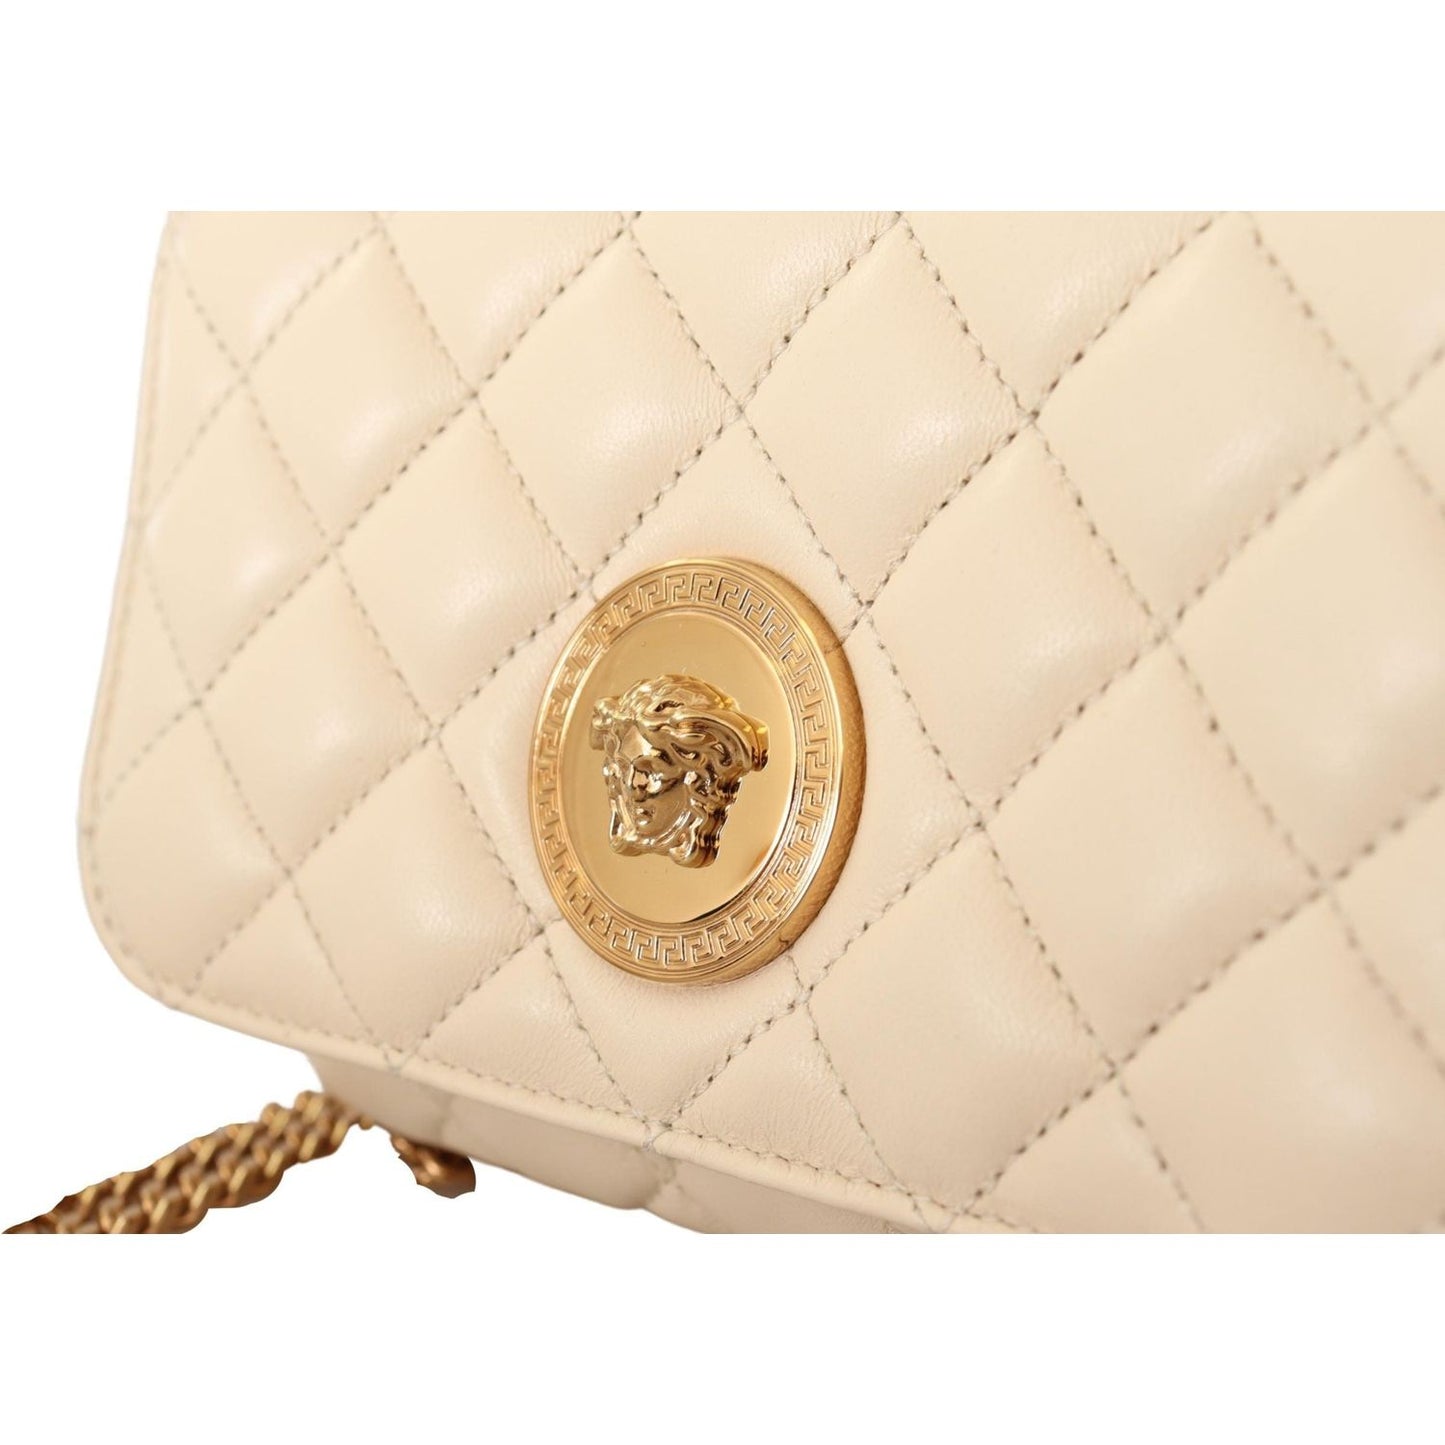 Versace Chic Nappa Leather Crossbody in Purity White white-nappa-leather-medusa-small-crossbody-bag